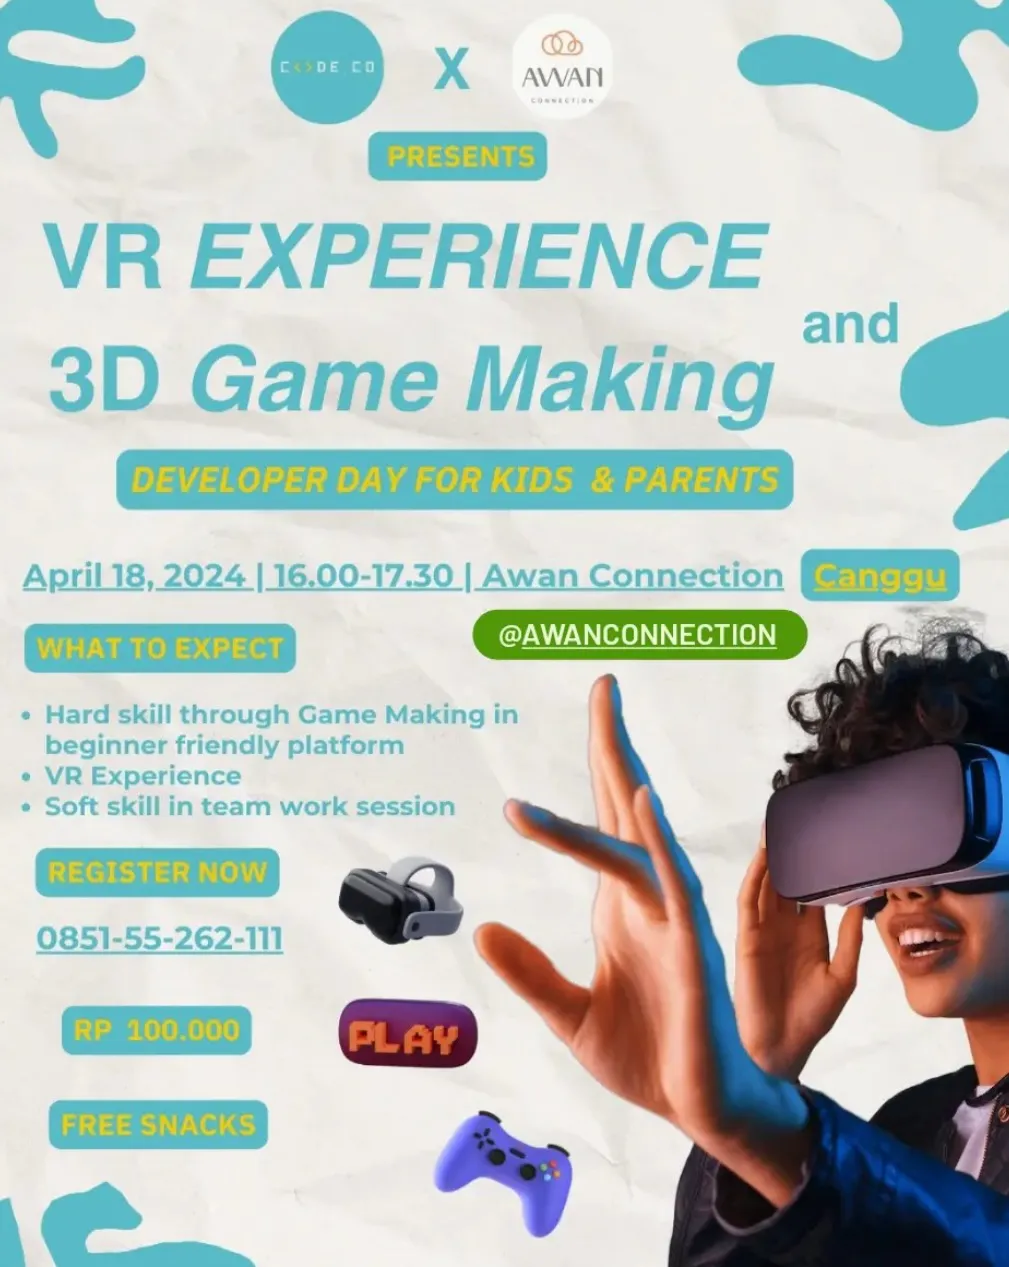 Game Vr Experience 3D Game Making 10545